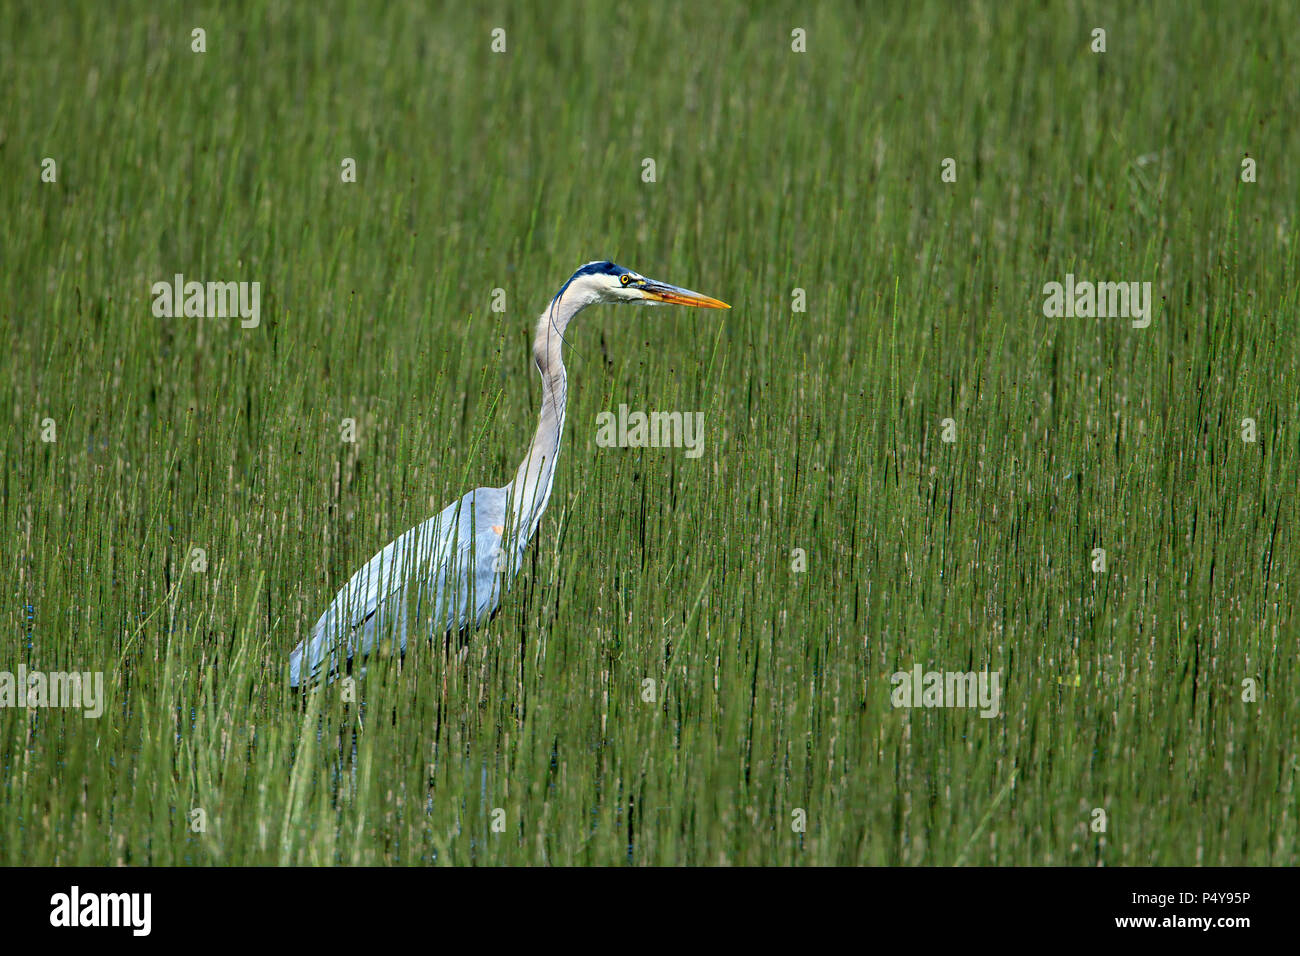 A great blue heron wades in water and grass at Wolf Lodge Bay area near Coeur d'Alene, Idaho Stock Photo